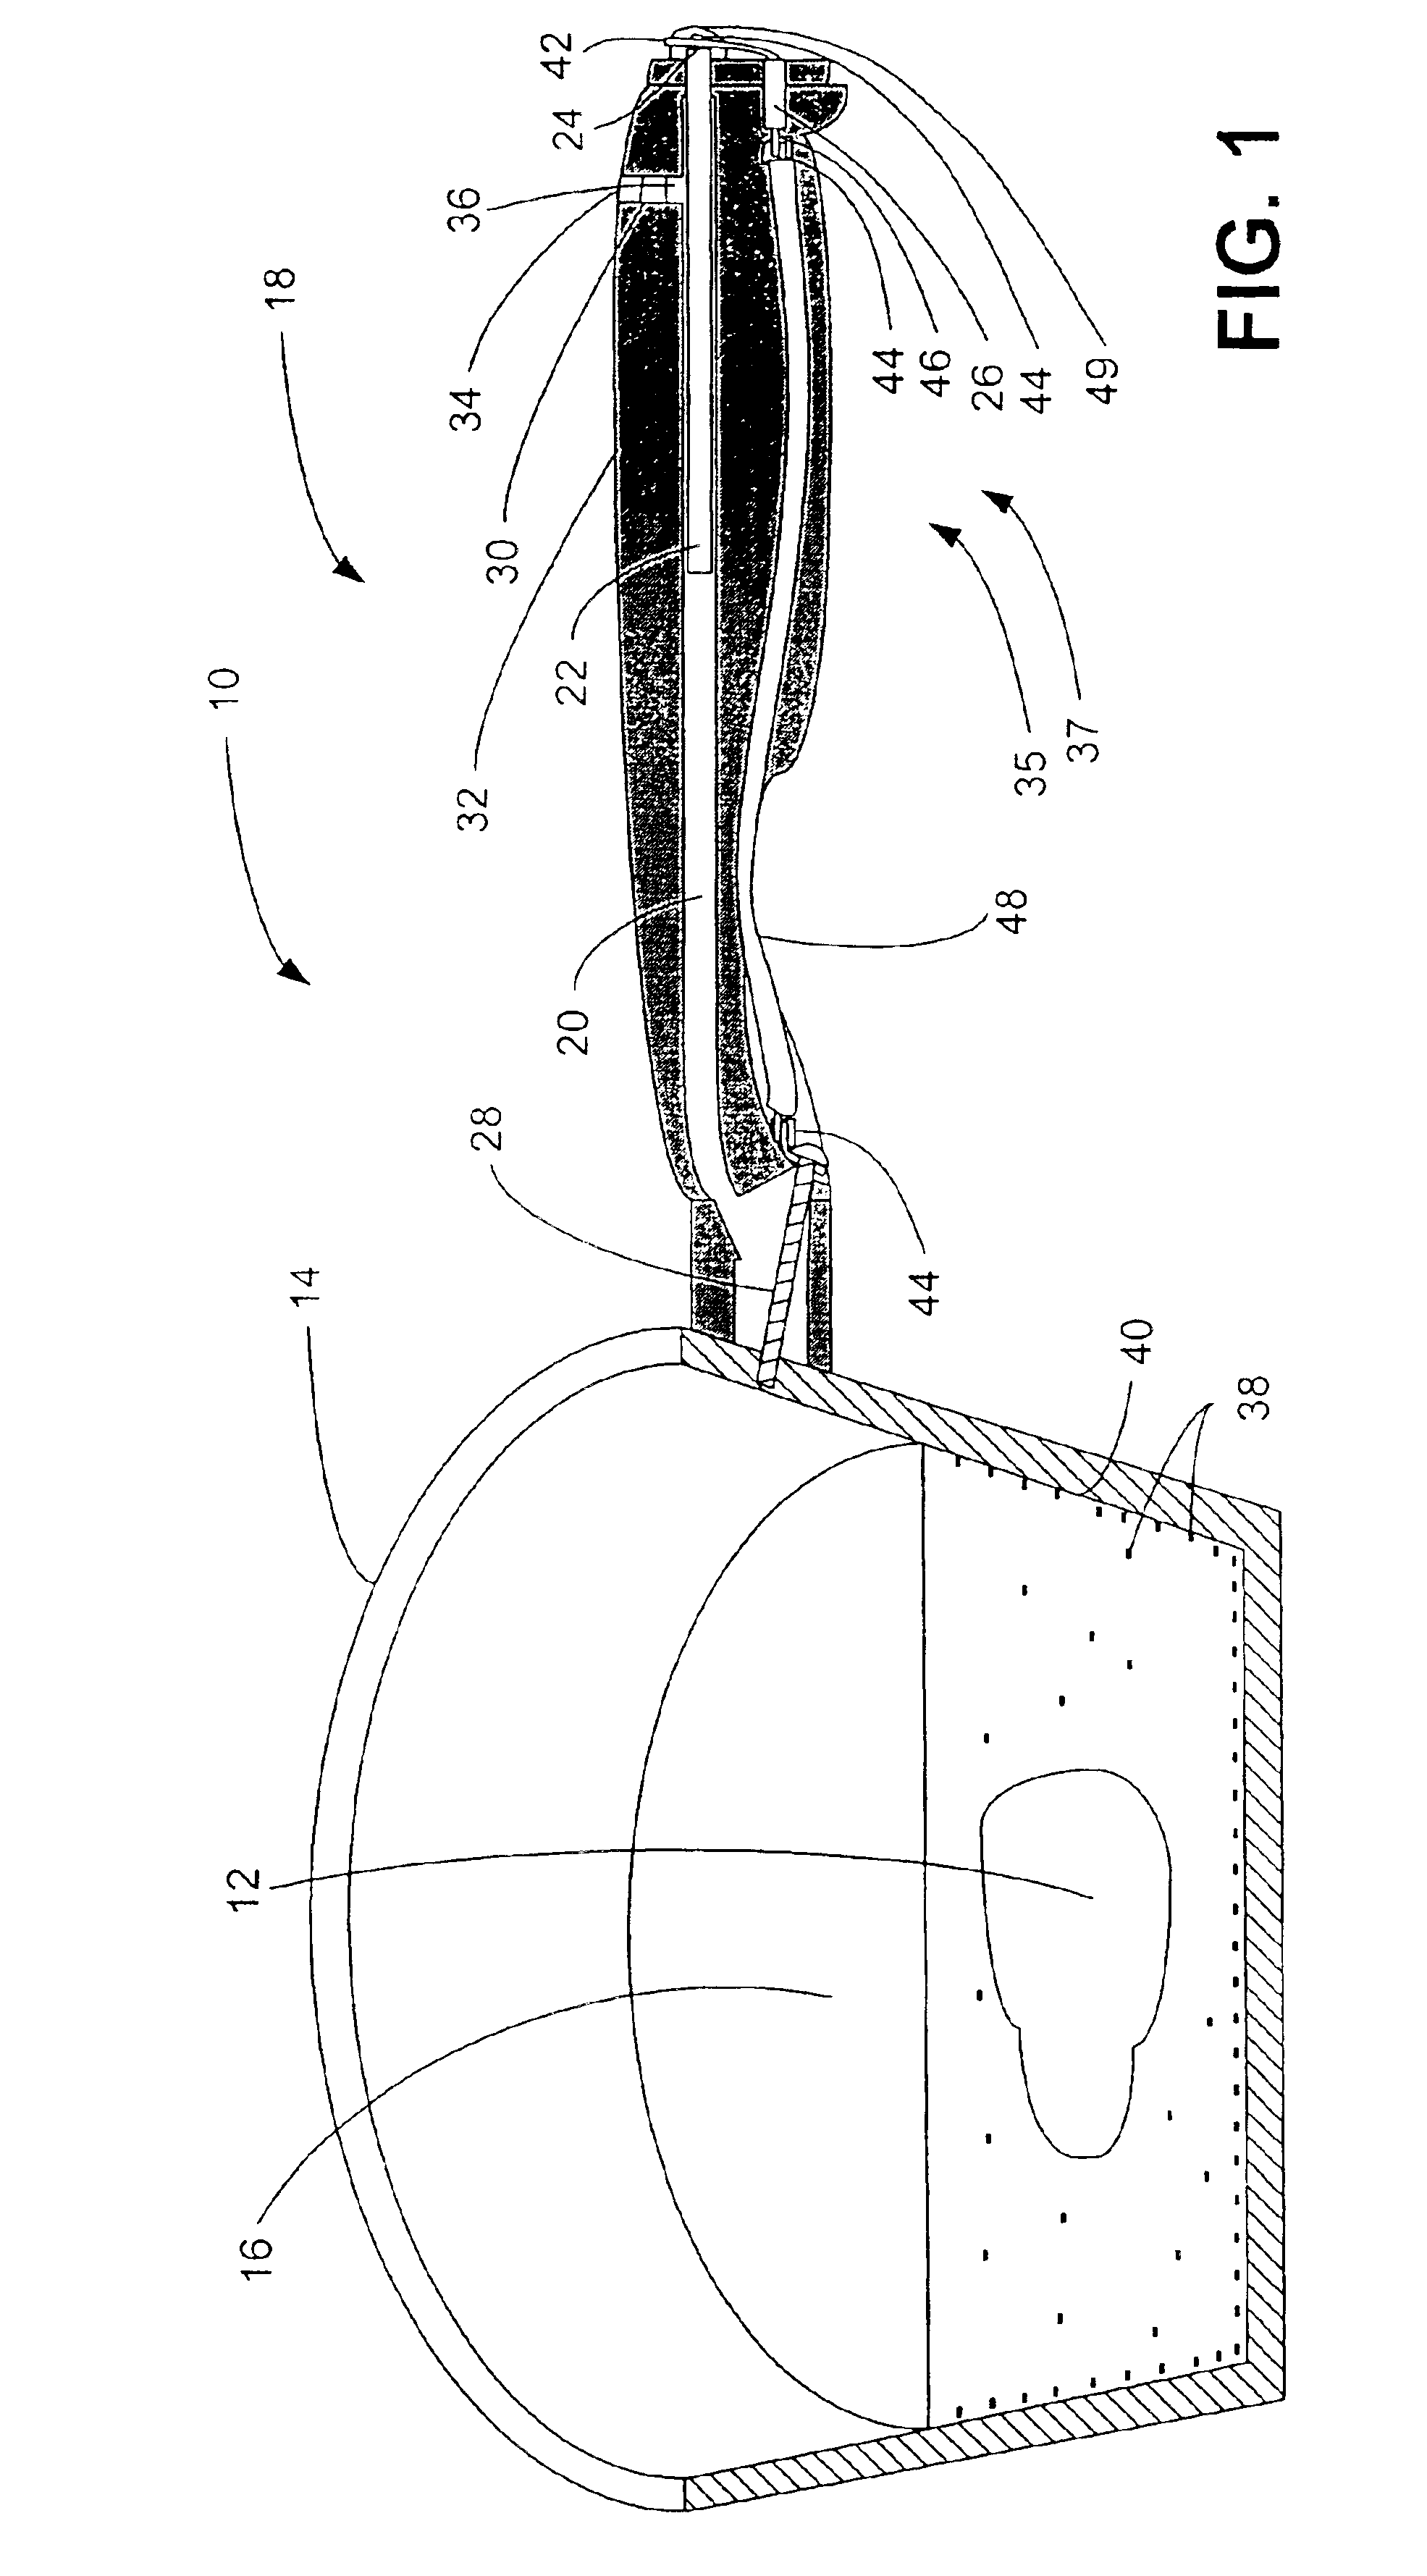 Electron source for food treating apparatus and method